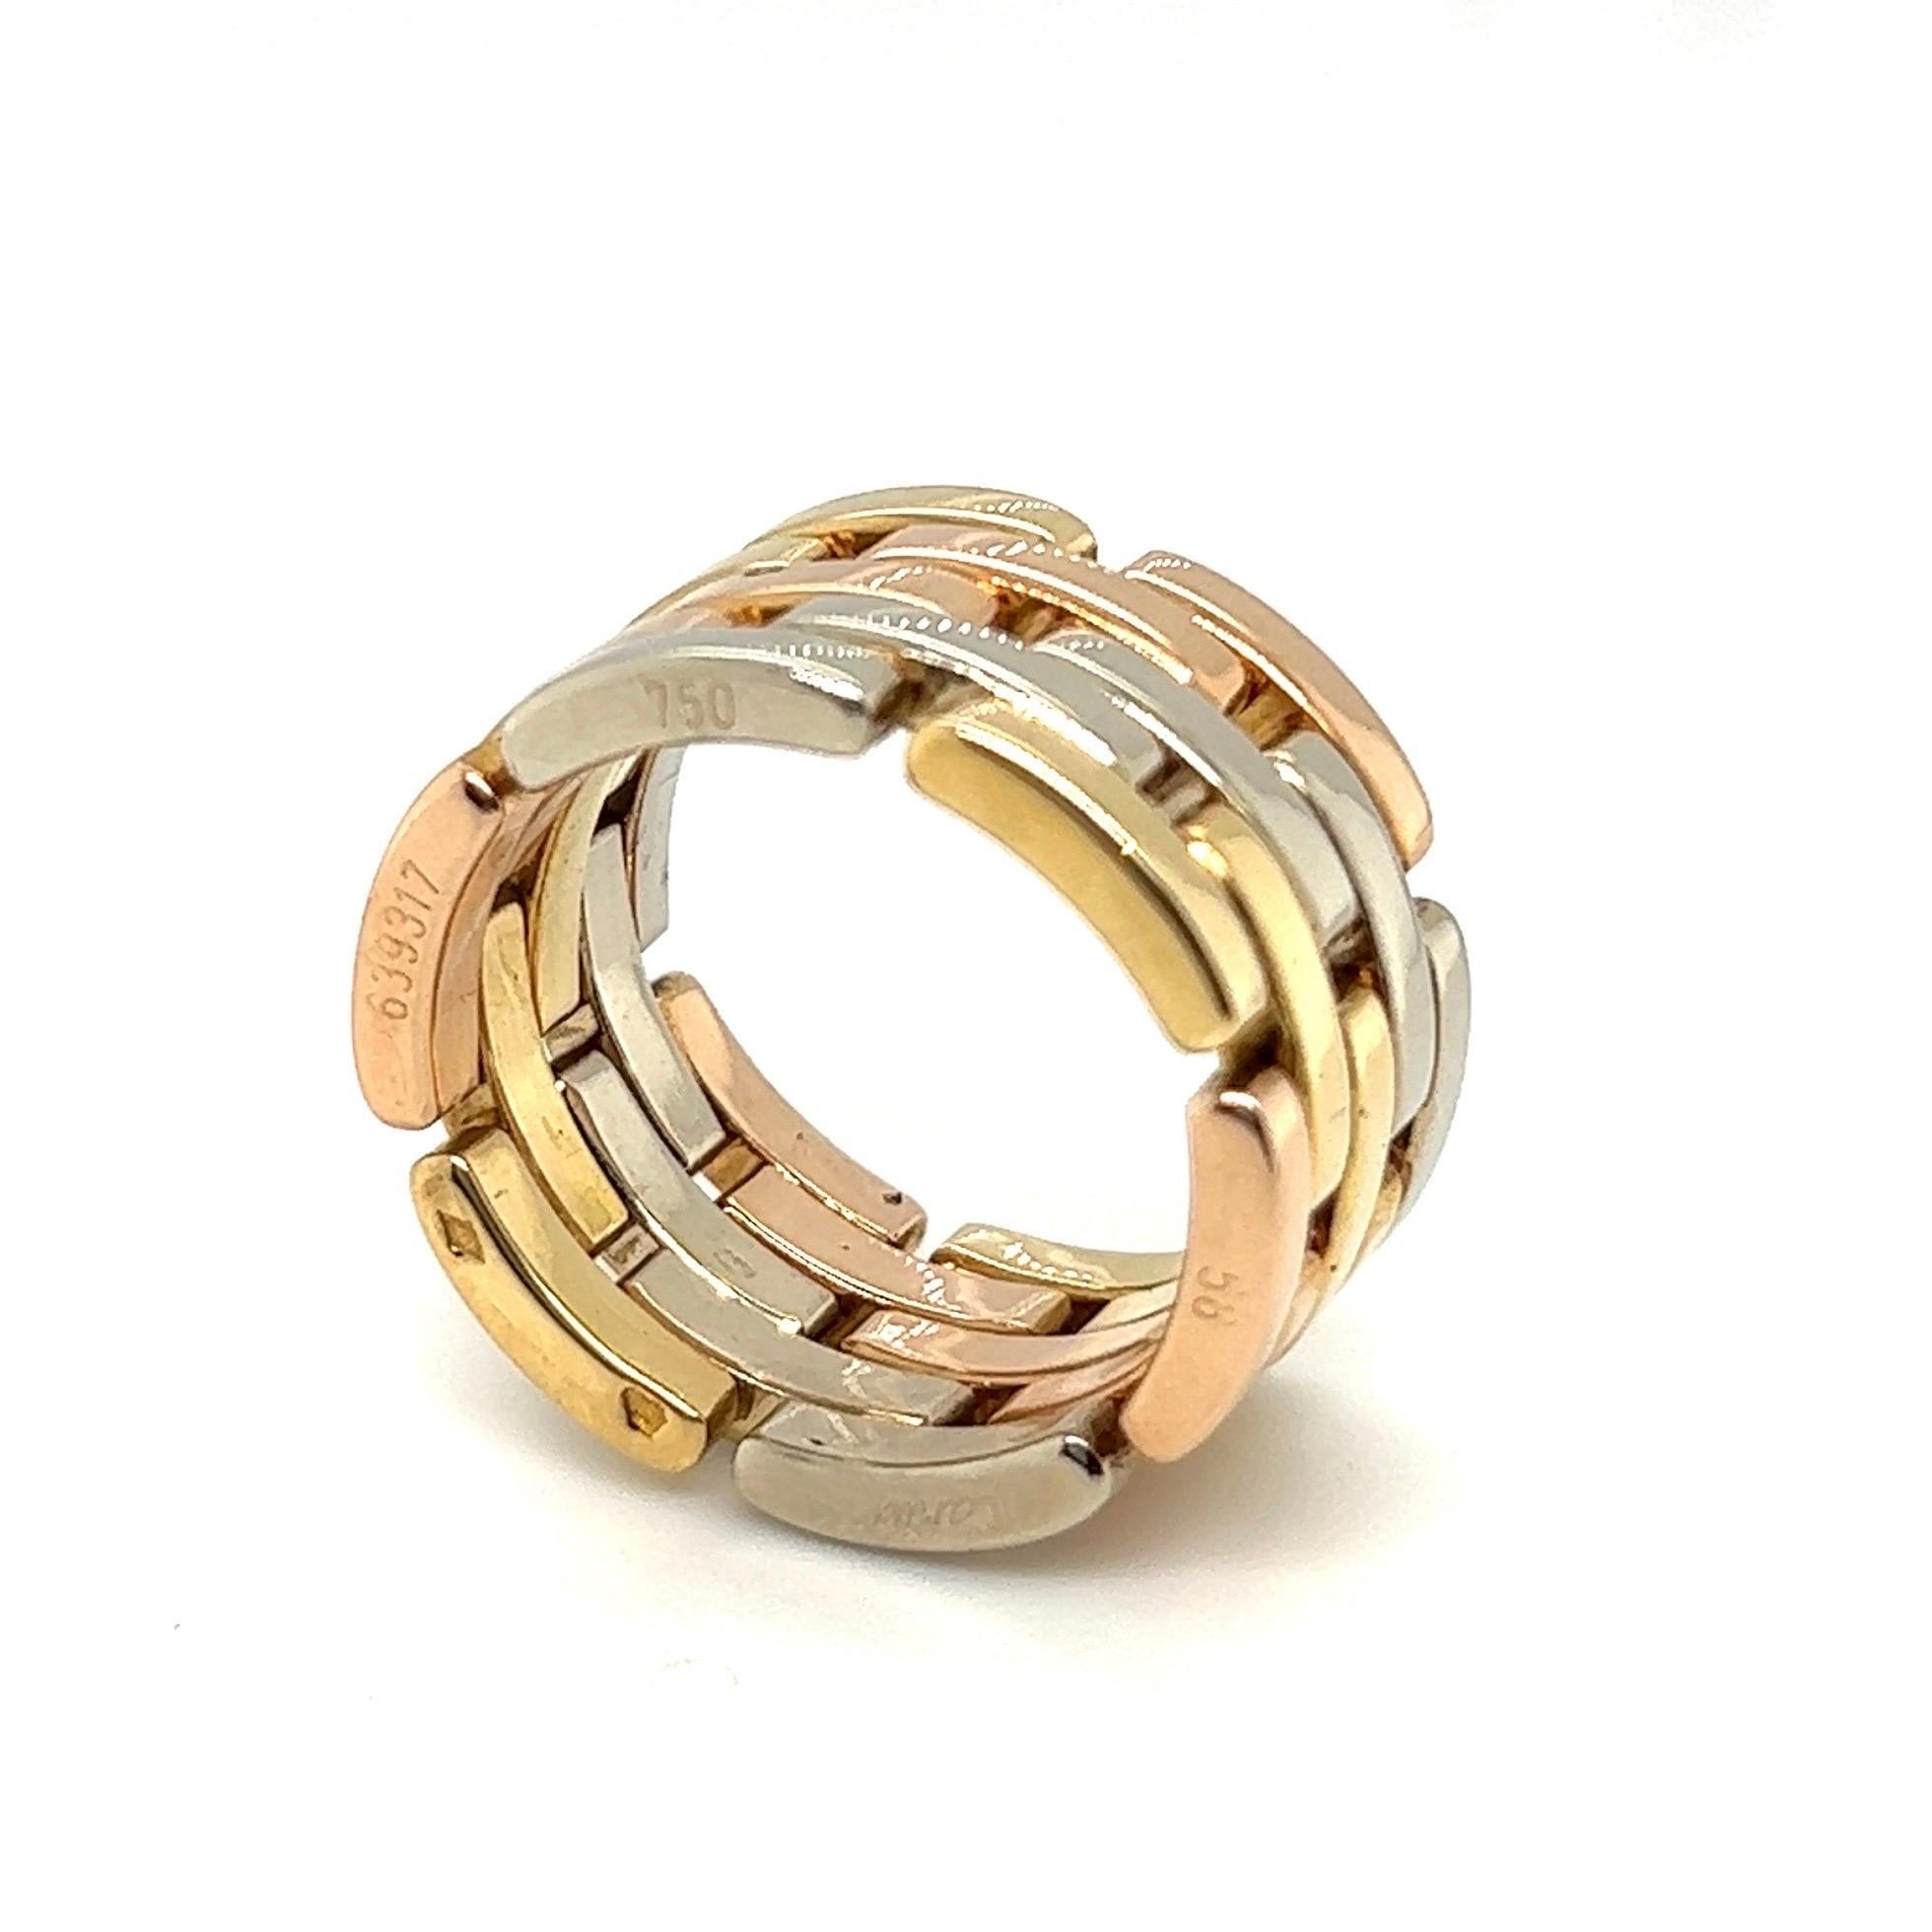 Stylish 18 karat yellow, white and rose gold Maillon Panthère 5 Row Band Ring by Cartier, 1980s. 
Designed as a wide band ring featuring Cartier's iconic brick pattern in 18 karat yellow, white and rose gold. 
The collection Maillon Panthère is